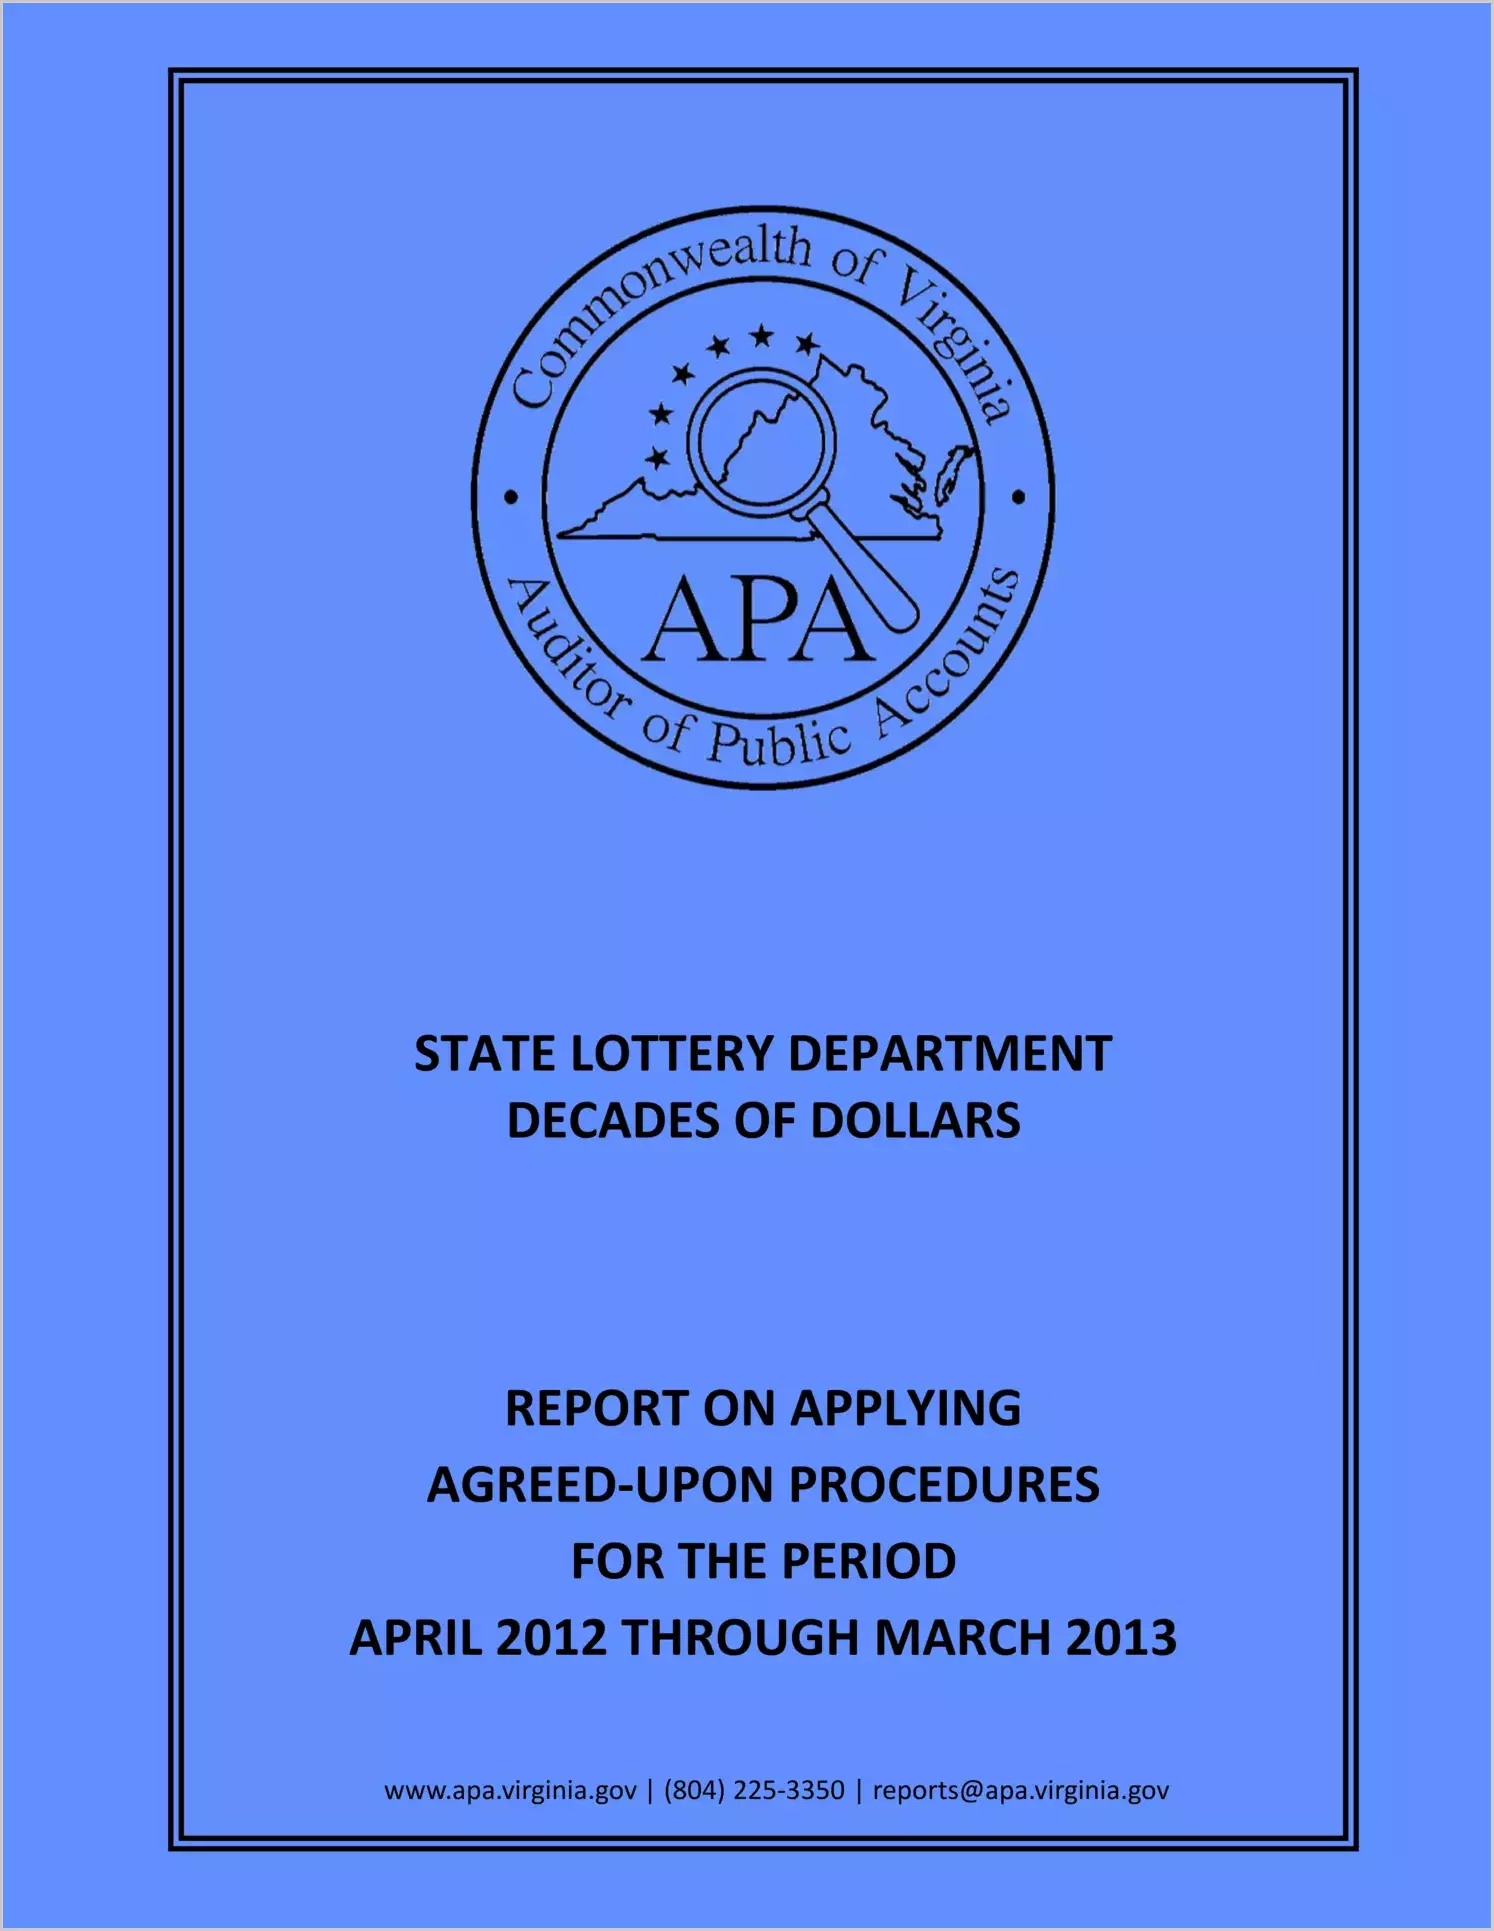 State Lottery Department Decades of Dollars report on Applying Agreed-Upon Procedures for the period April, 2012 throgh March, 2013